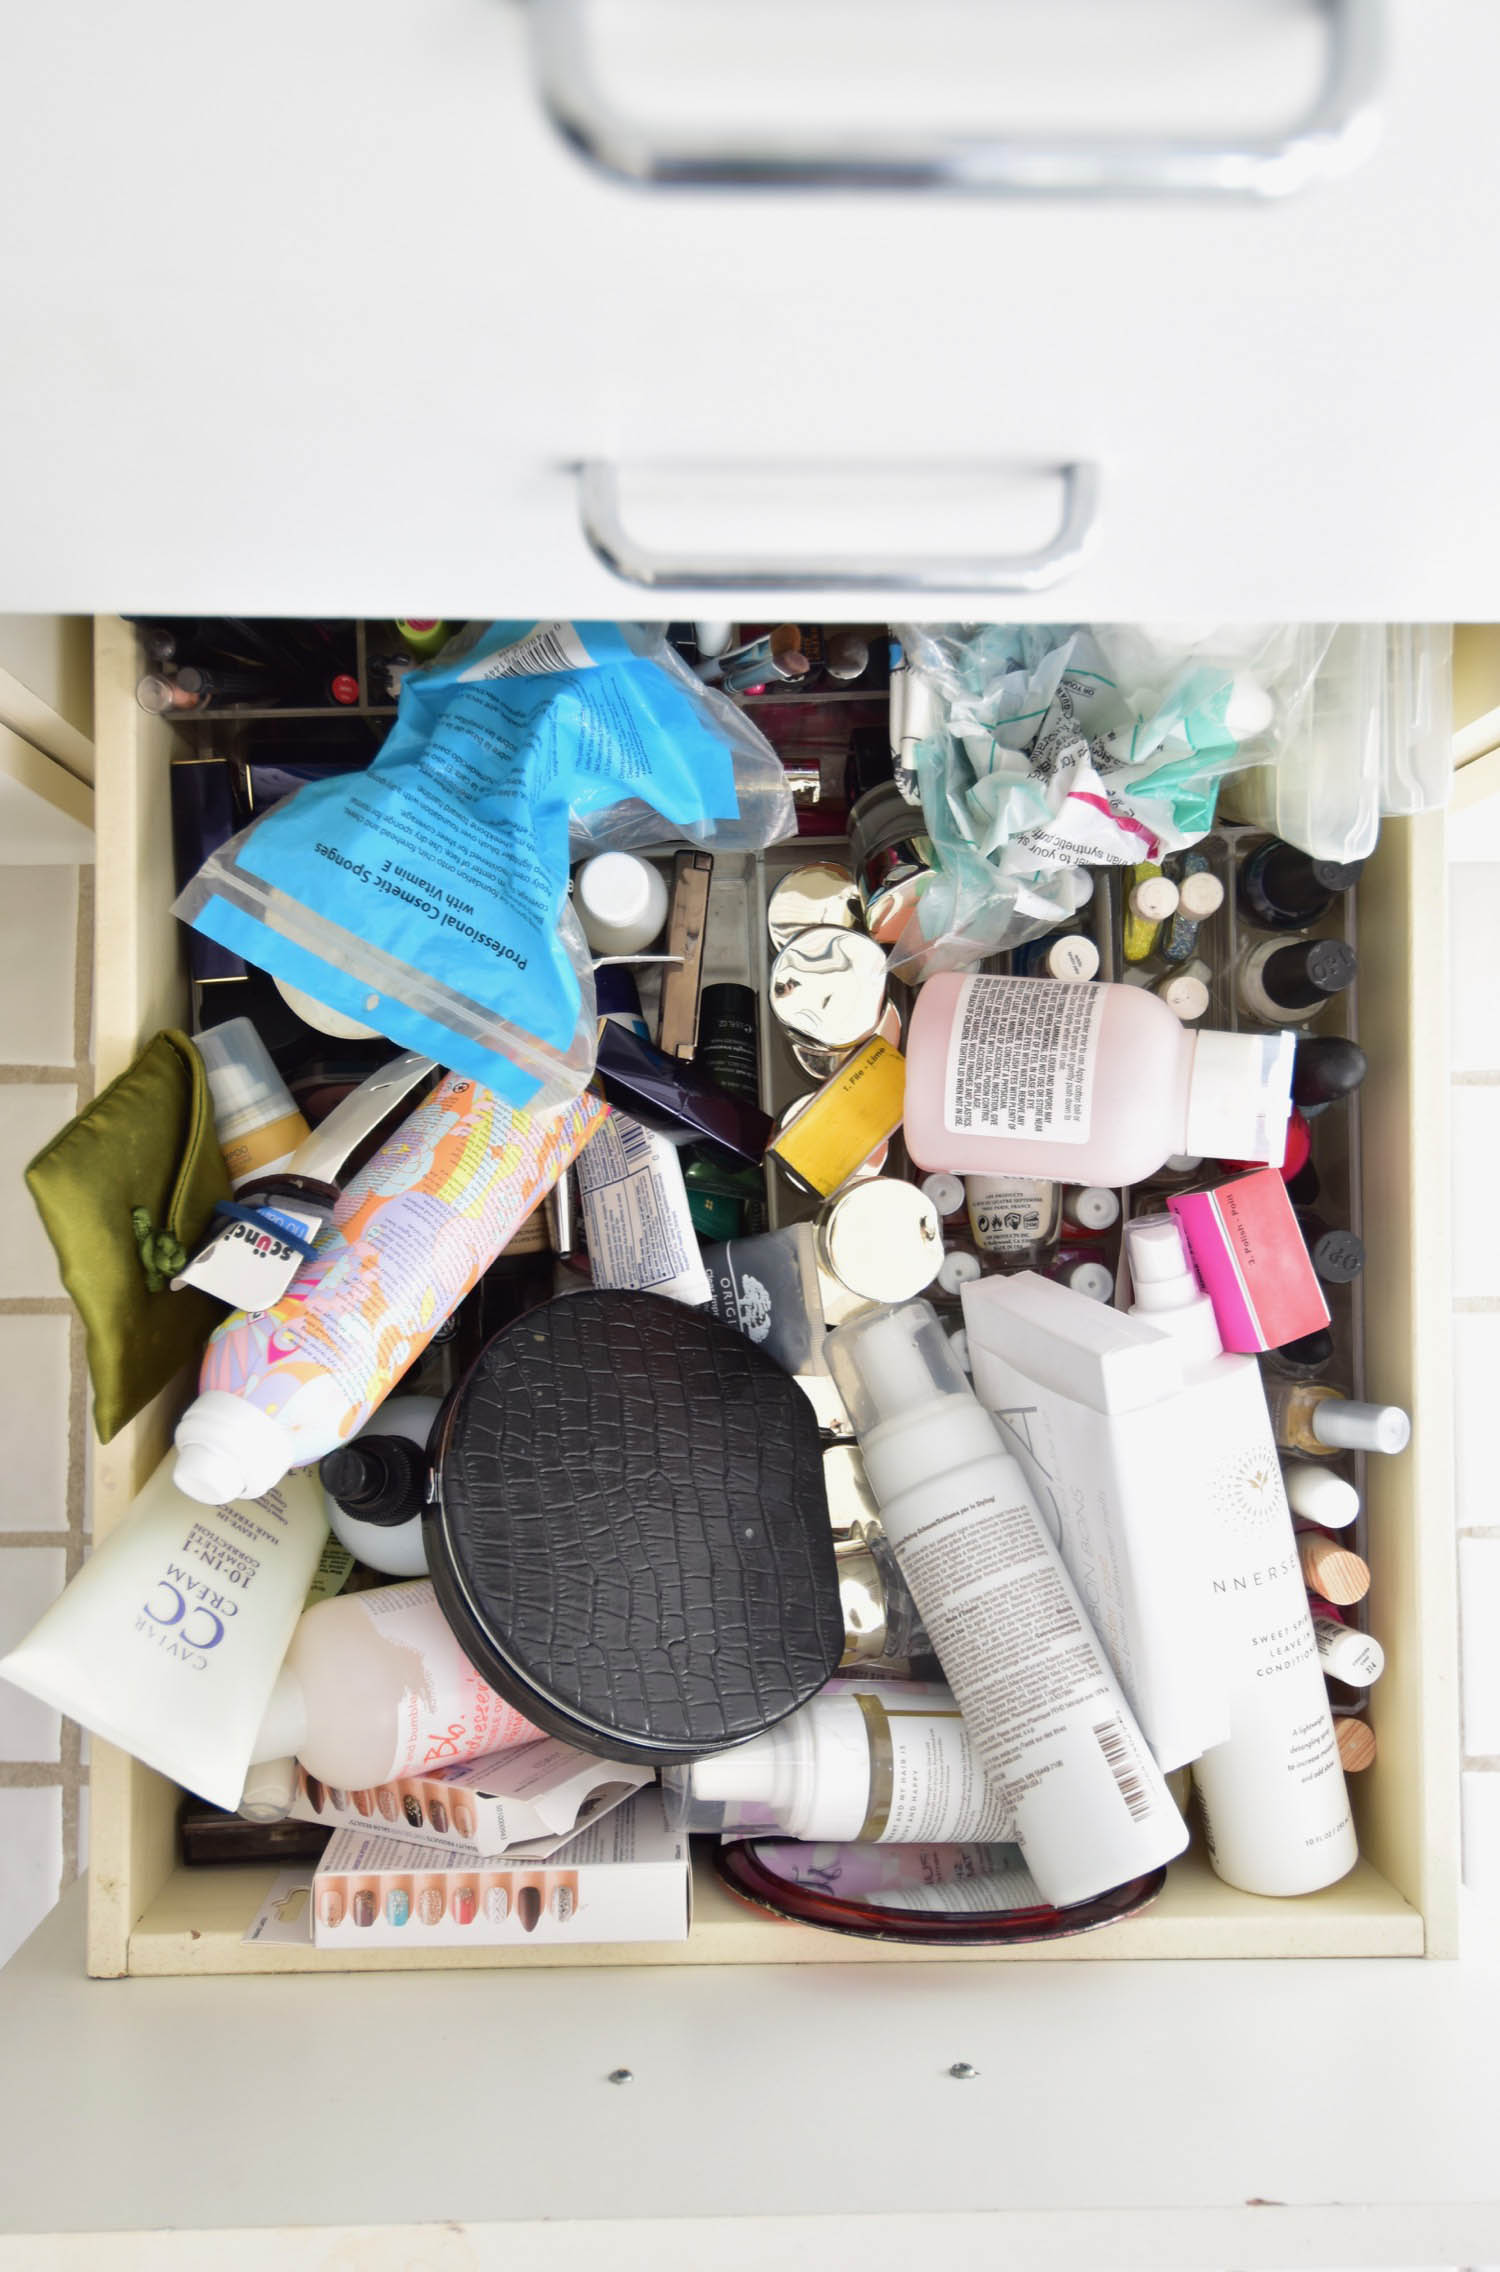 Bathroom drawer Organization, Beauty and makeup storage ideas, before